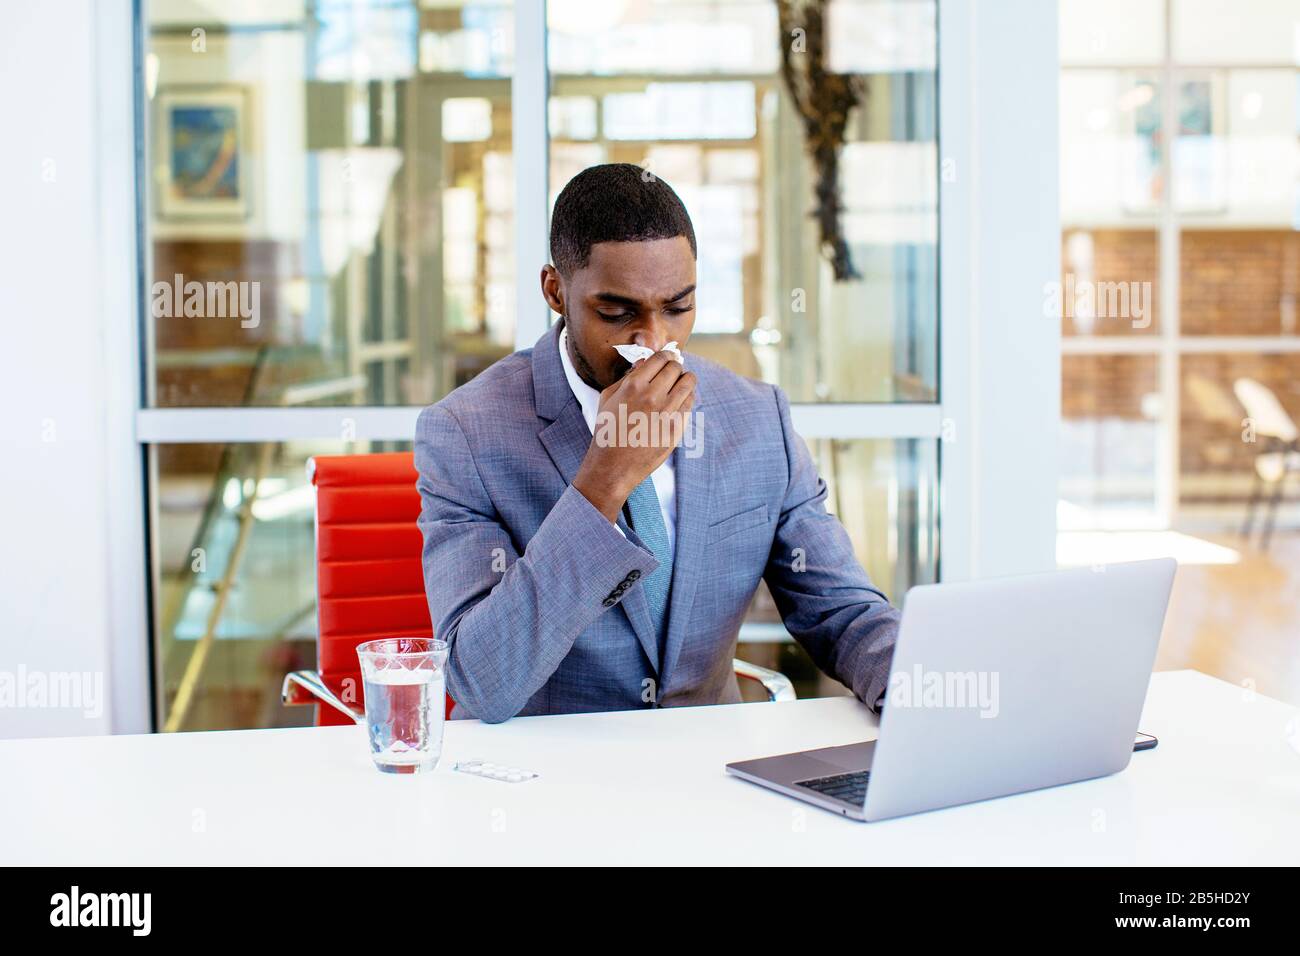 Portrait of a sick young man in business suit having a cold,  blowing his nose while sitting behind desk at work with computer Stock Photo